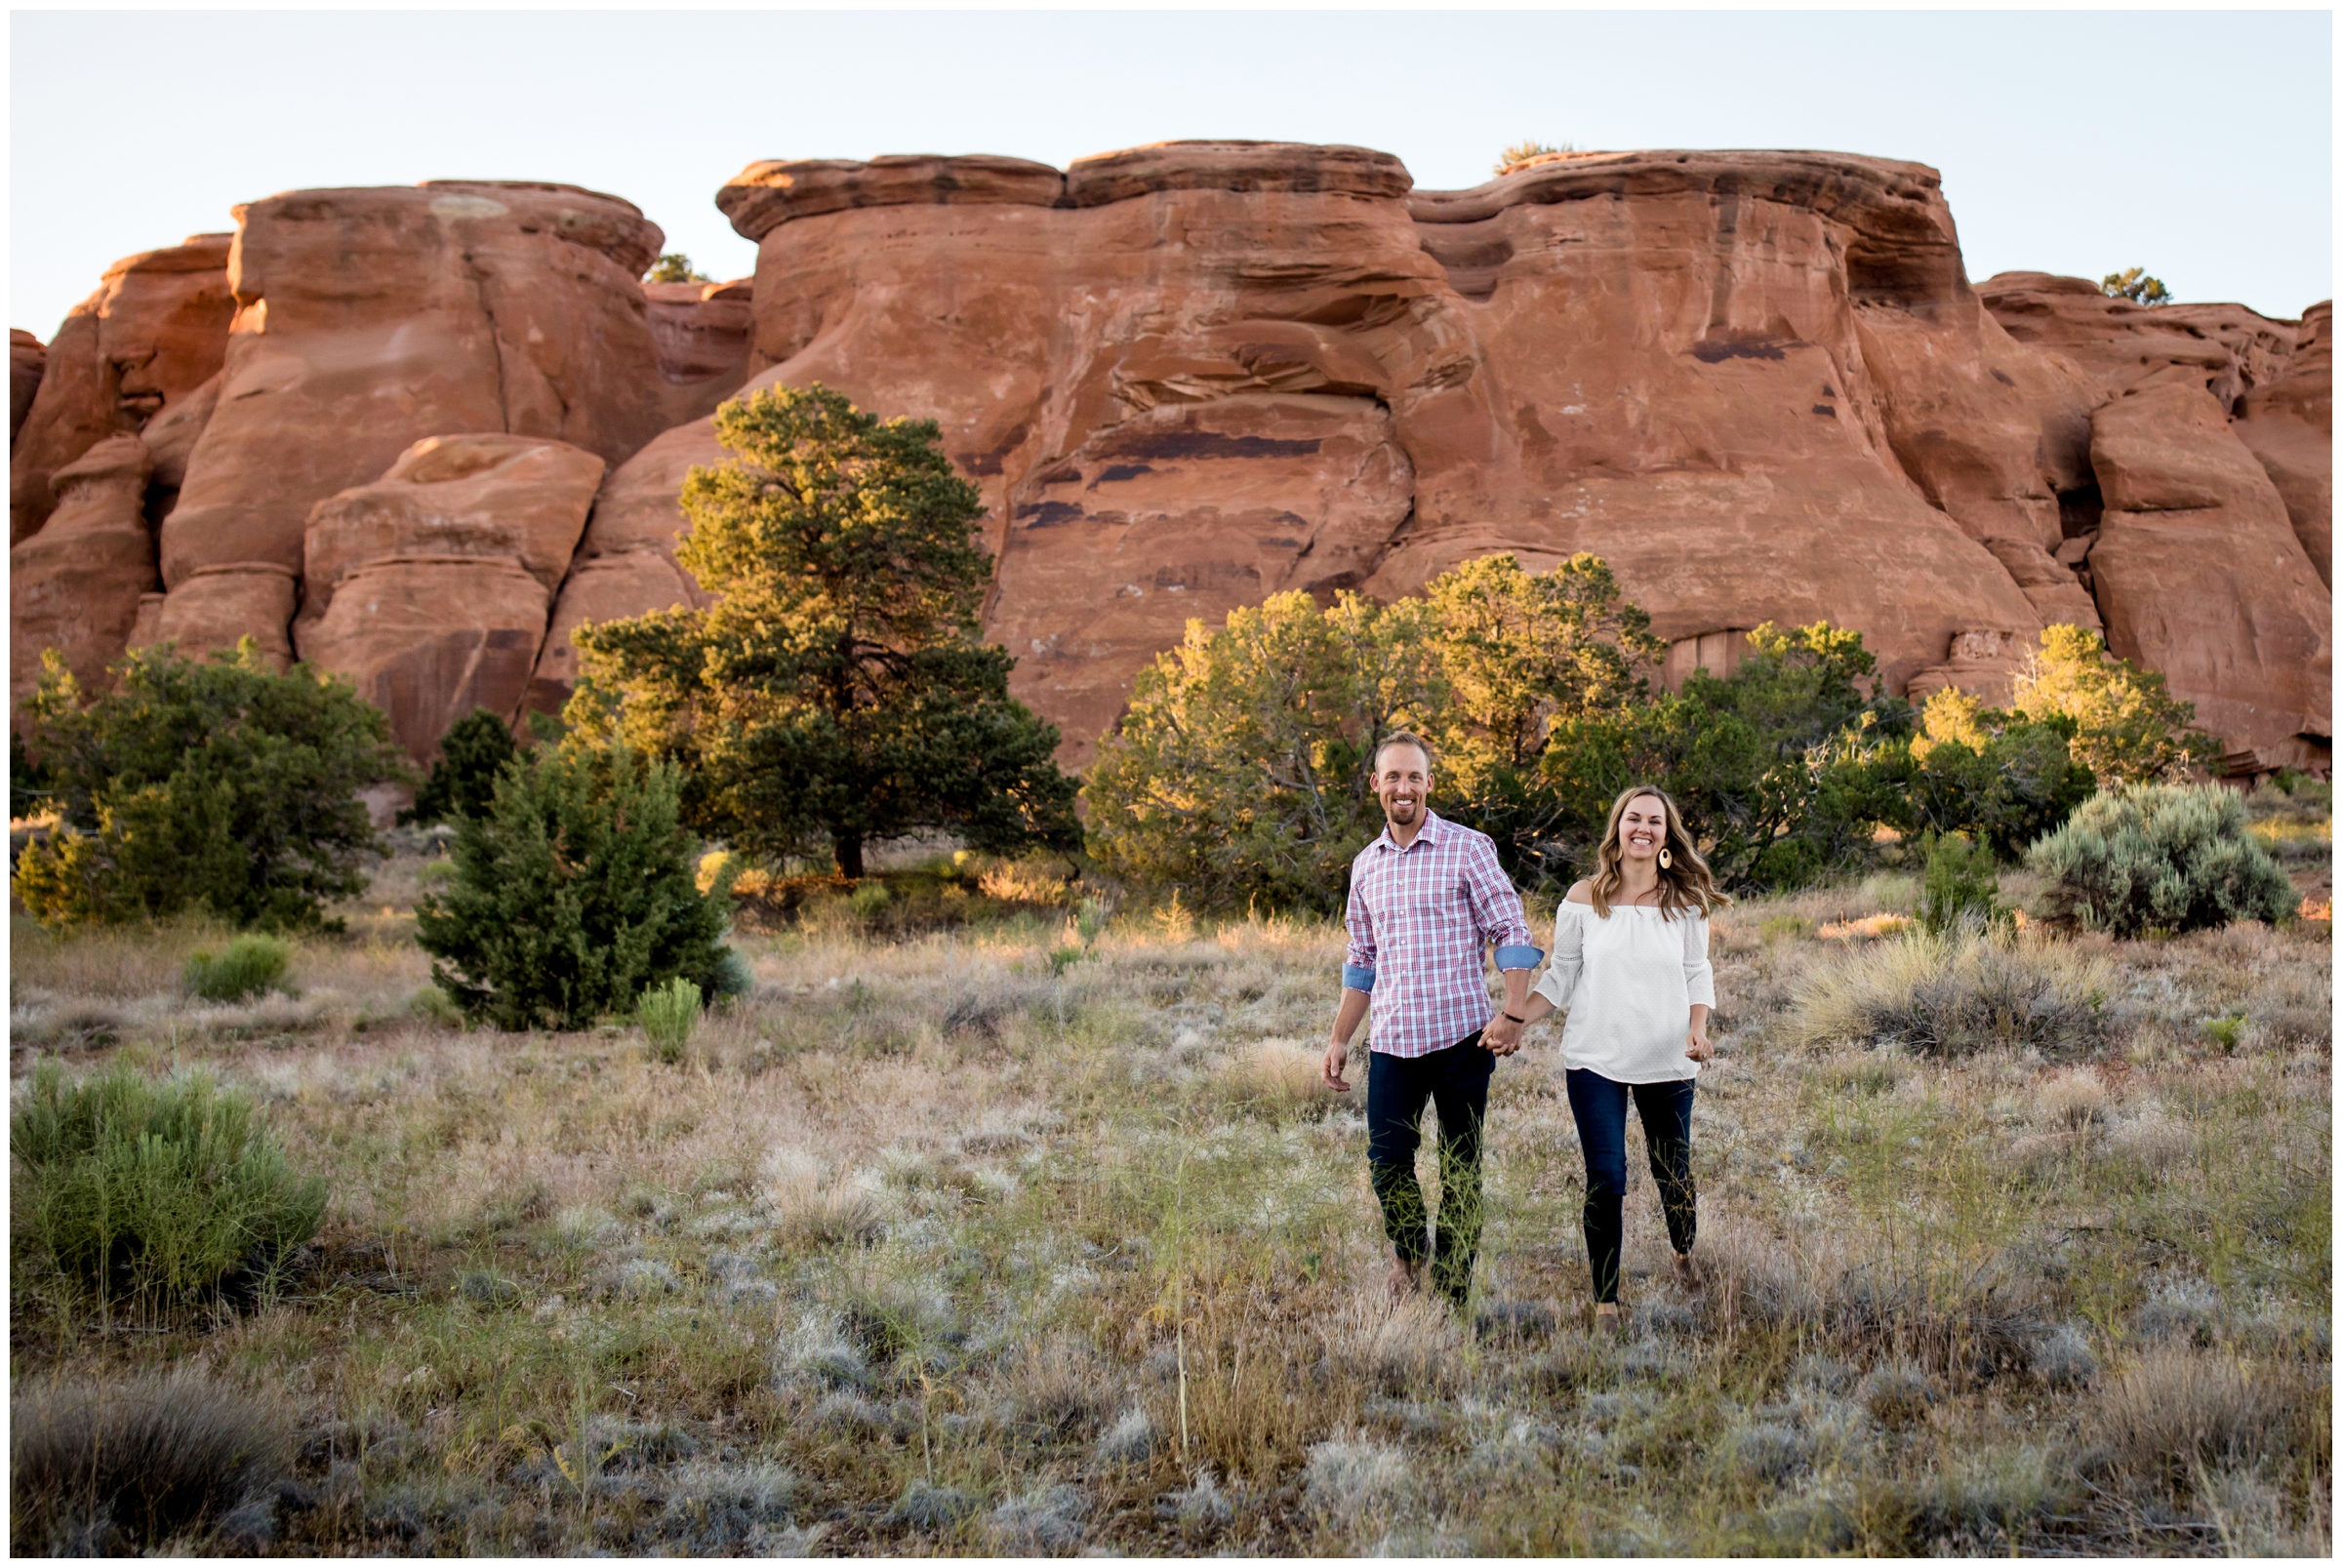 Couple's anniversary photos at Colorado National Monument, by Grand Junction photographer Plum Pretty Photography.